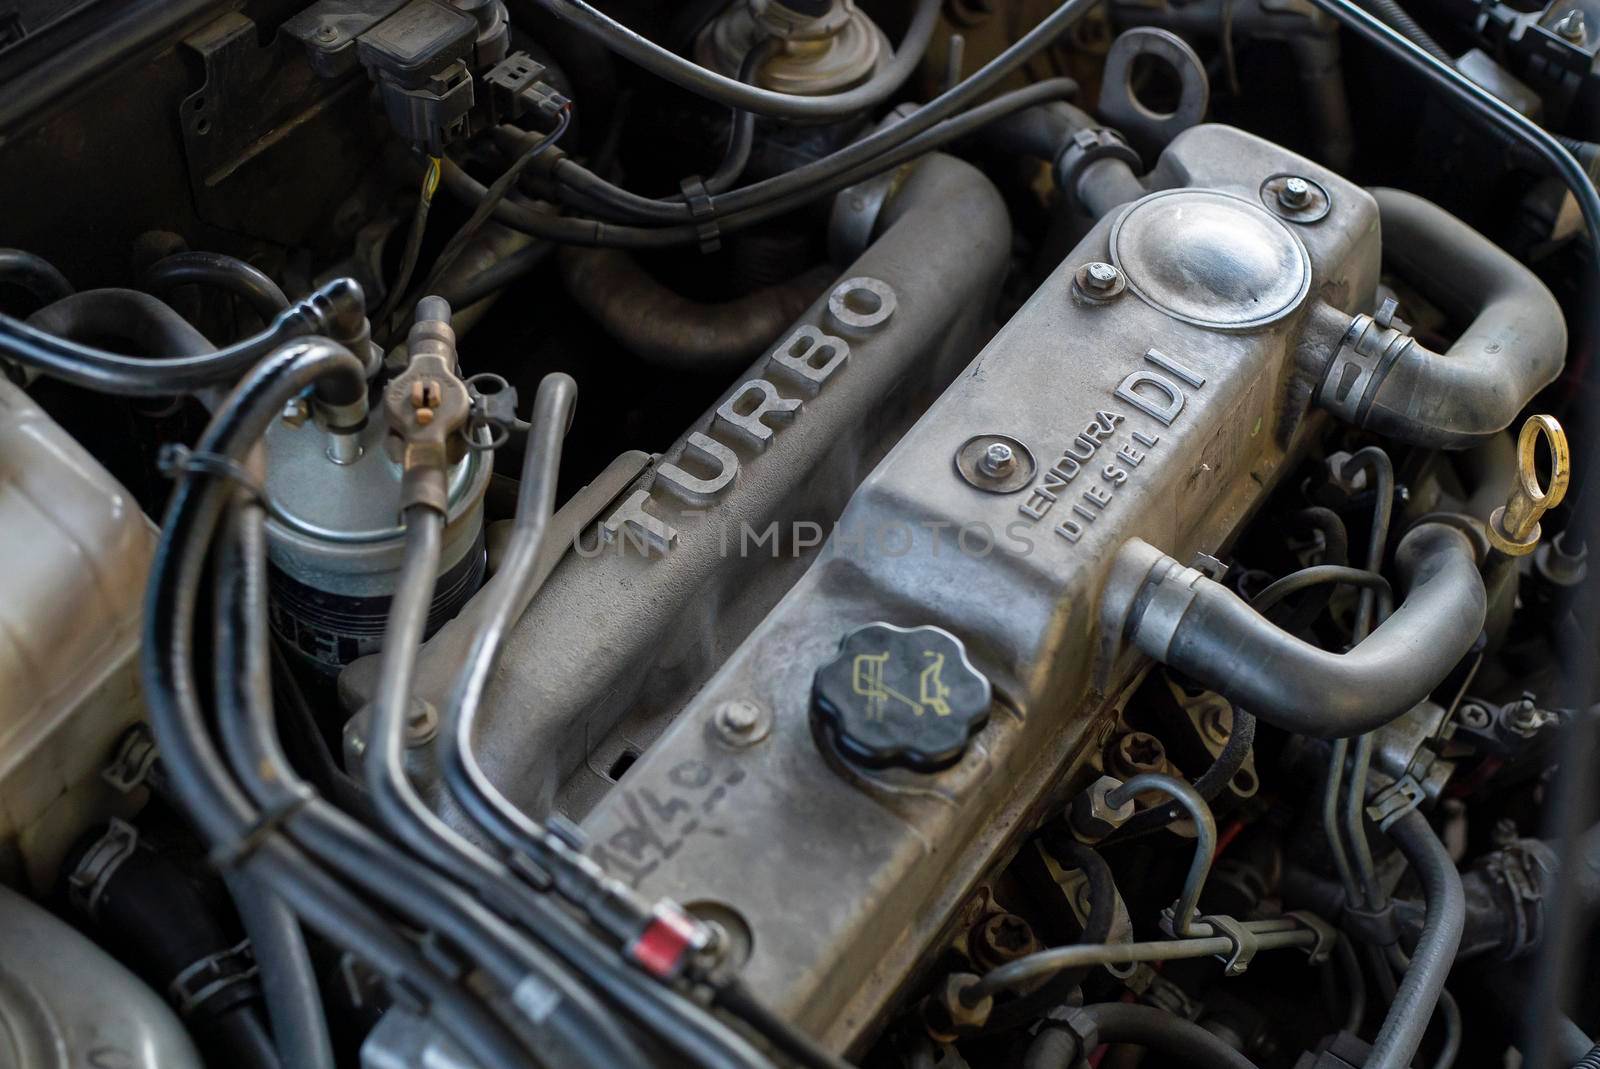 Used car engine 4 by pippocarlot